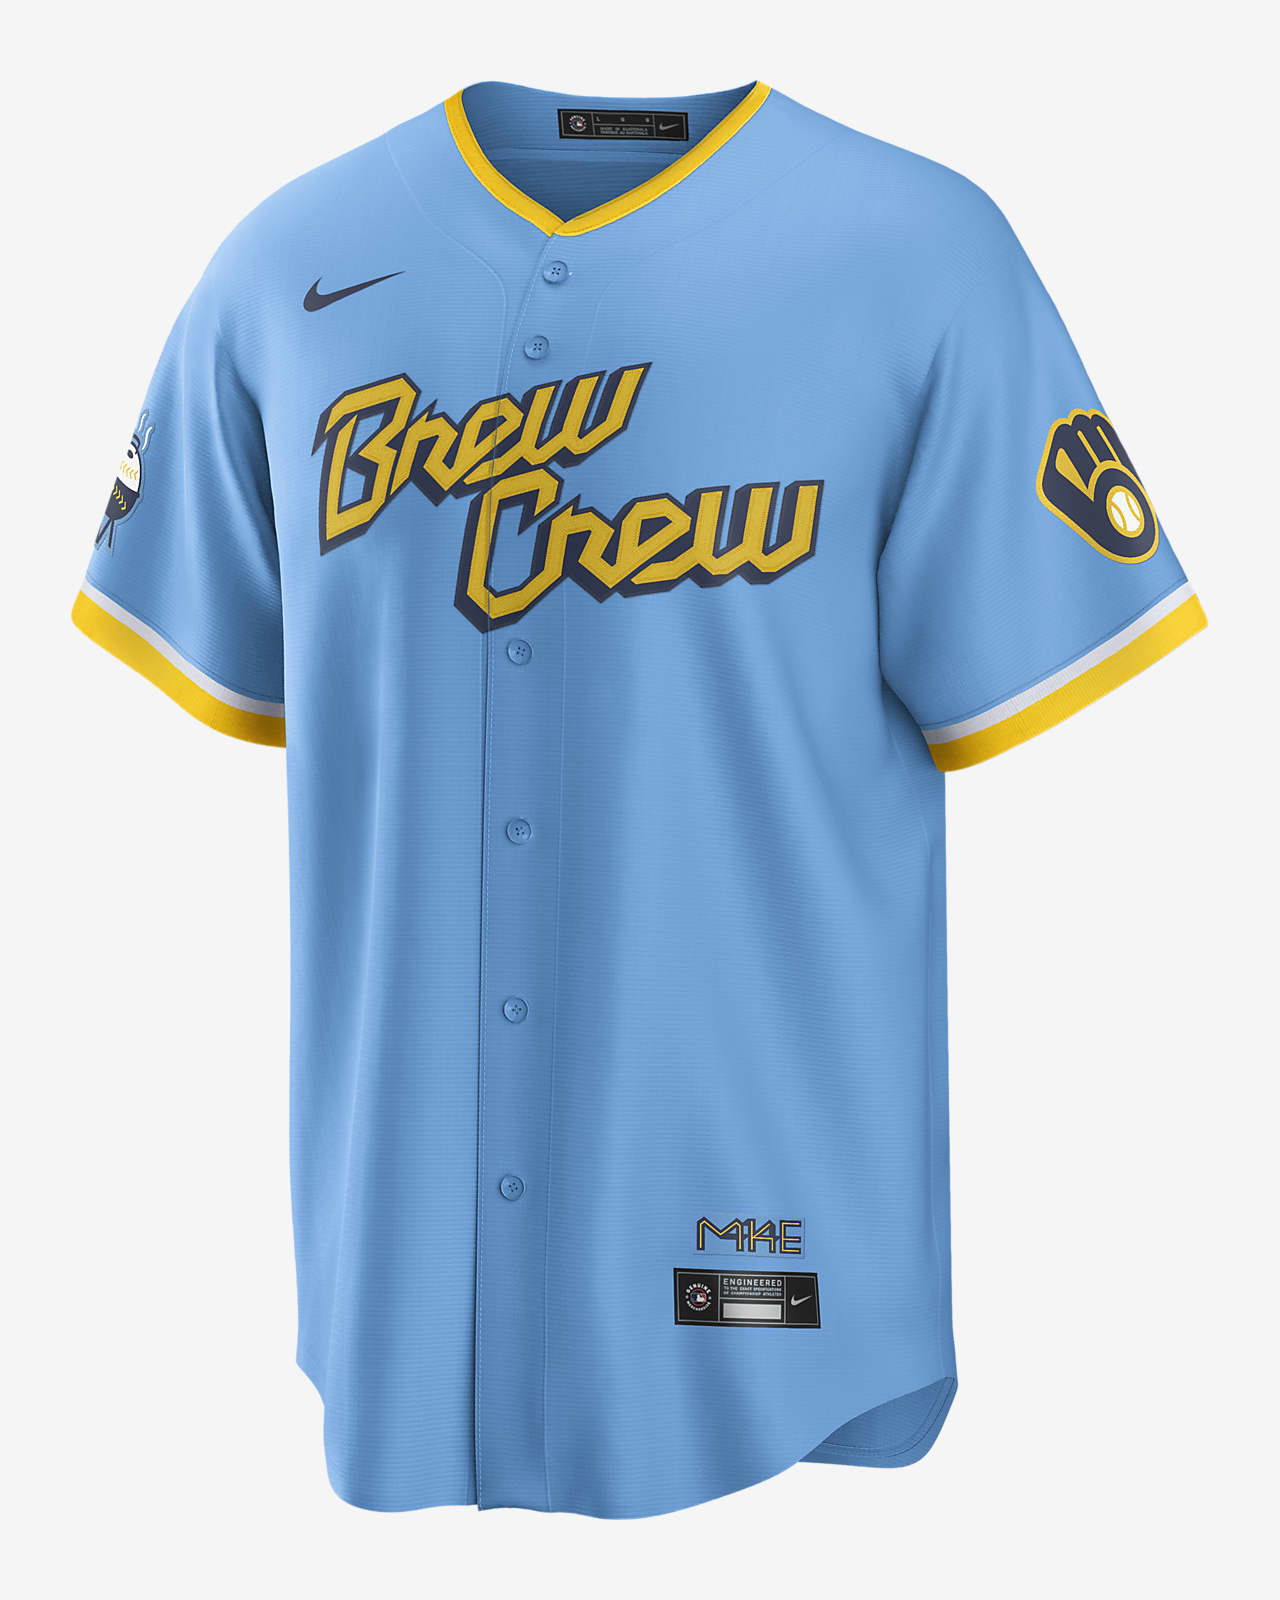 brewers jersey outfit